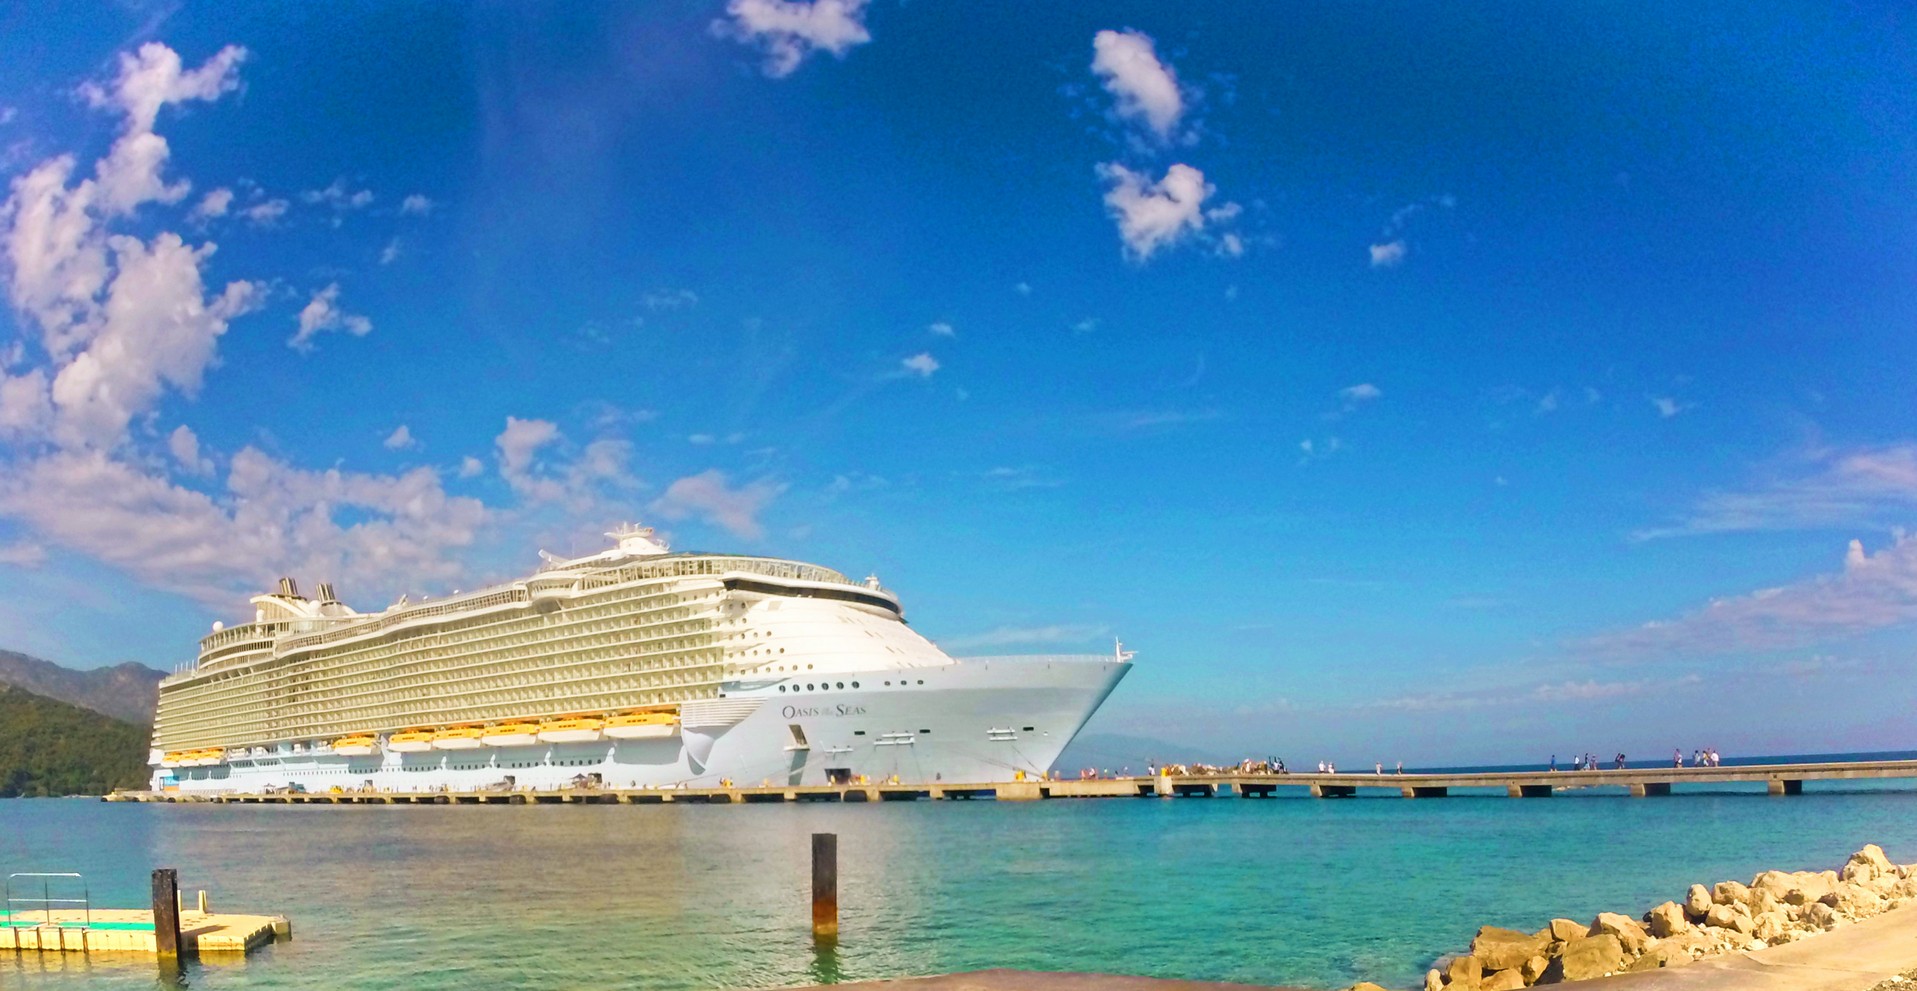 Oasis of the Seas in Port, Royal Caribbean Cruiseline